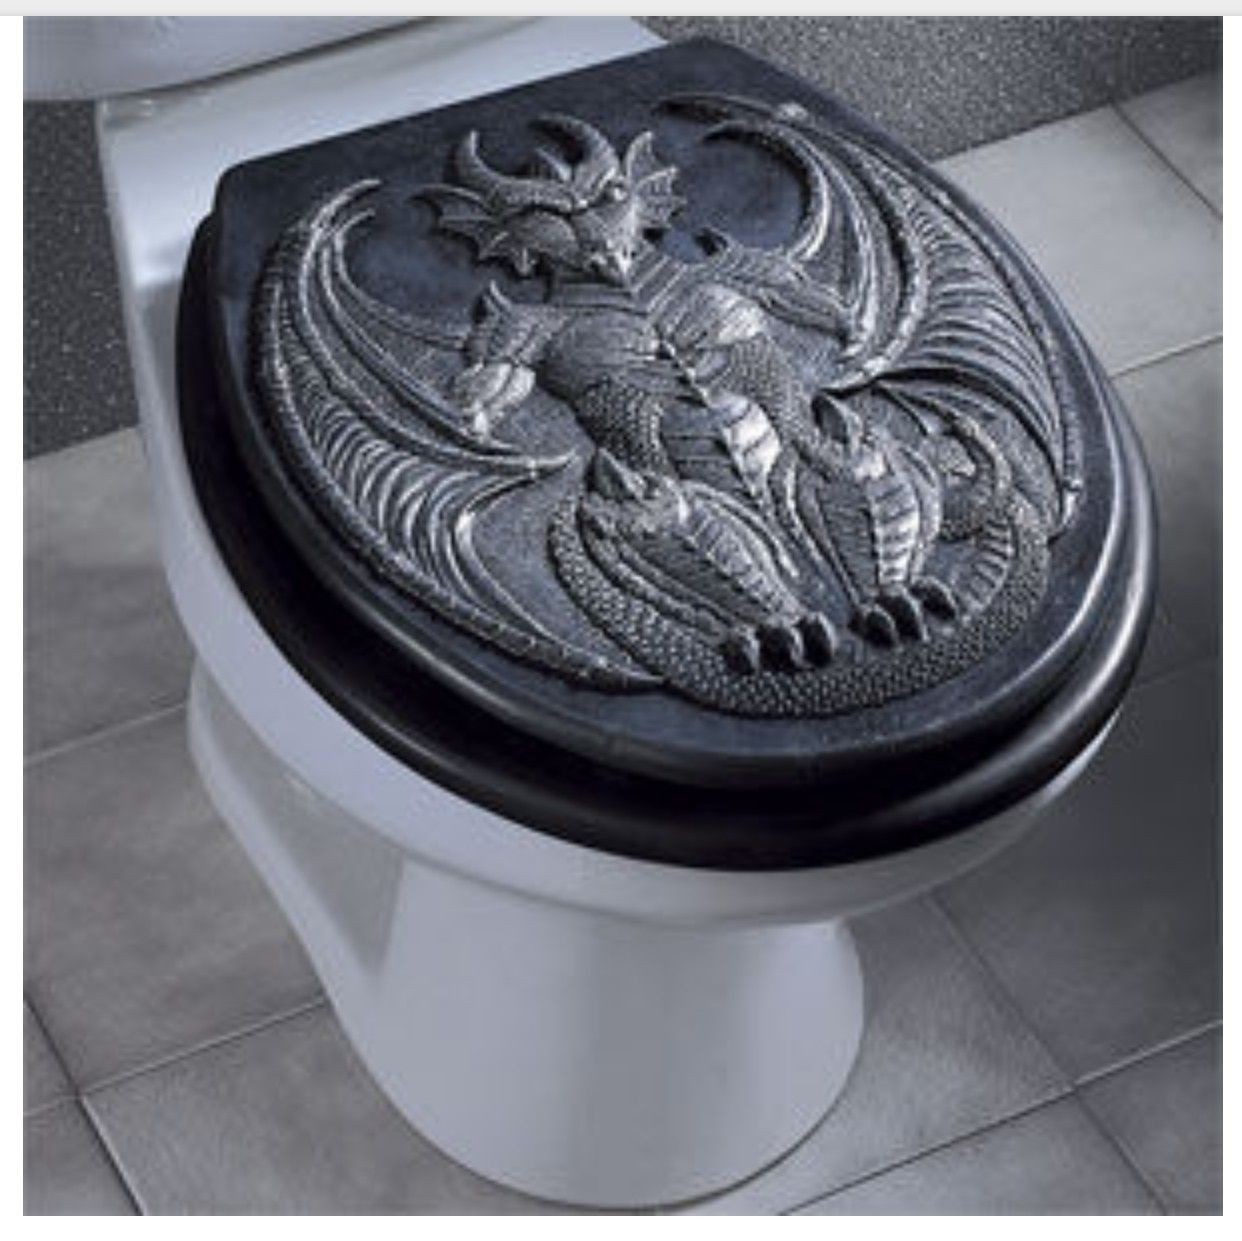 NOVELTY STAR FISH DESIGN WOOD MDF WC TOILET SEAT STRONG CHROME HINGES W FITTINGS 